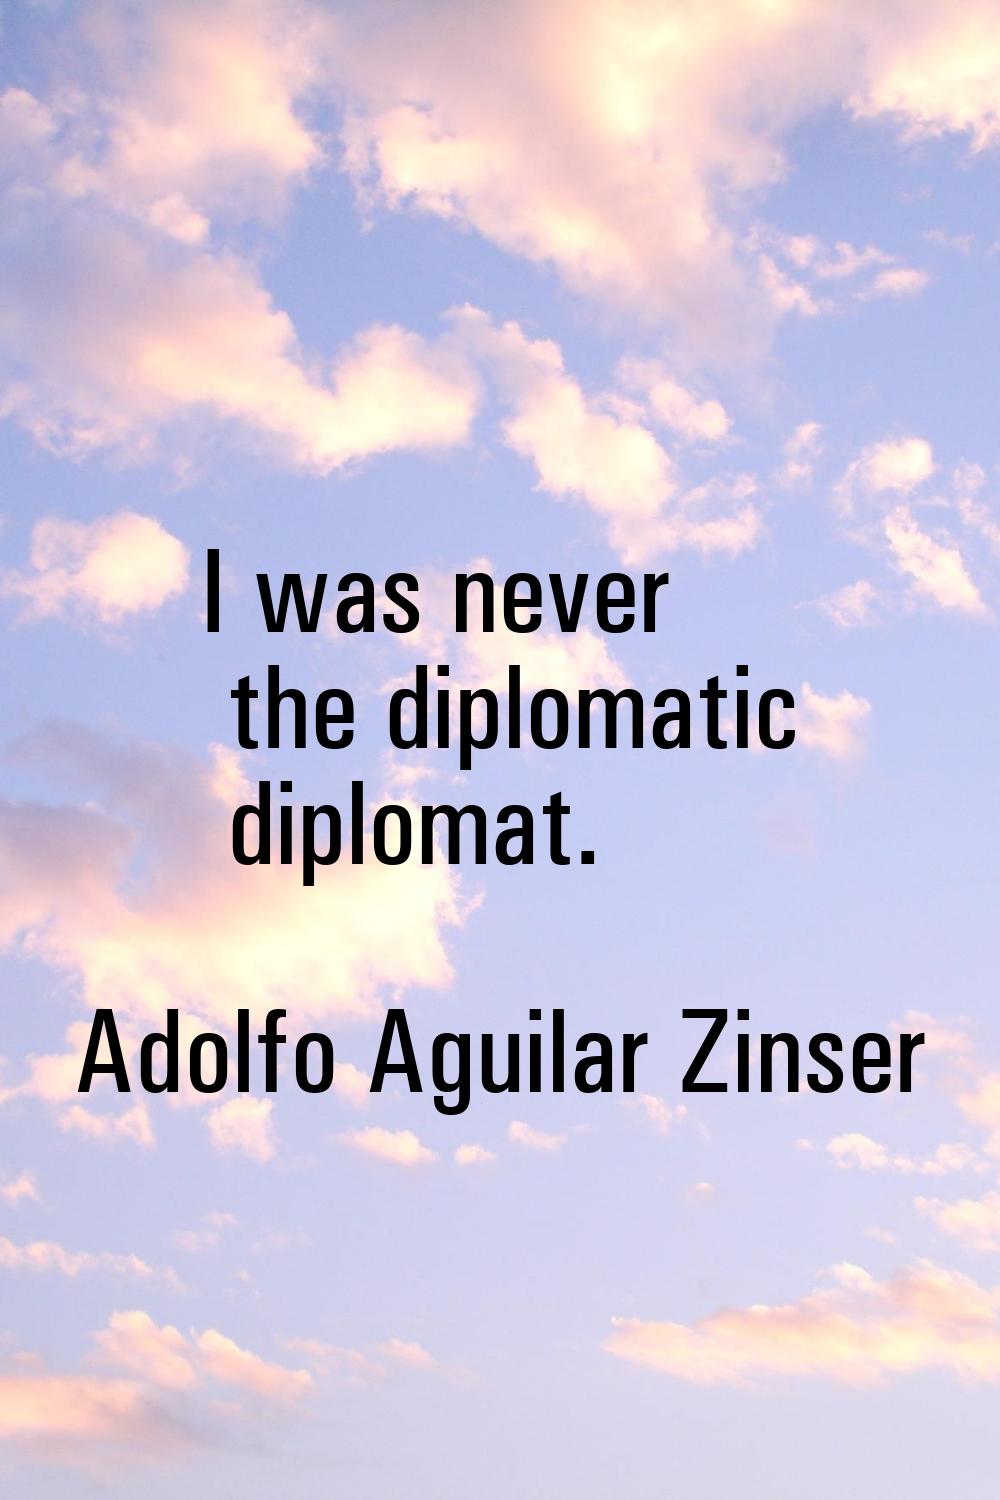 I was never the diplomatic diplomat.